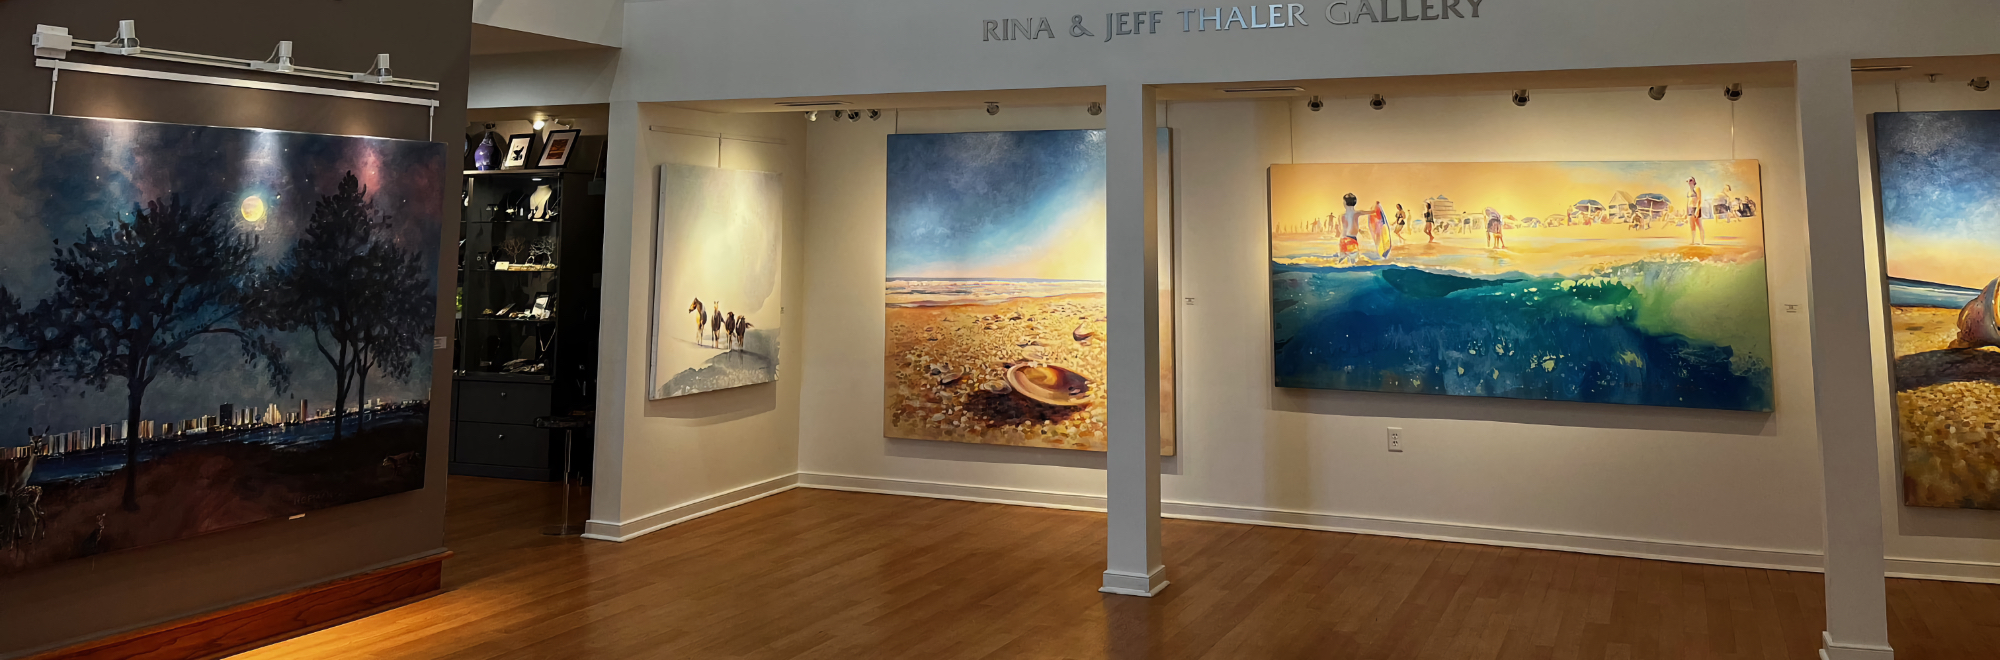 Featured in the Thaler Gallery / "Tides of Life in OCMD", paintings by Randy Hofman